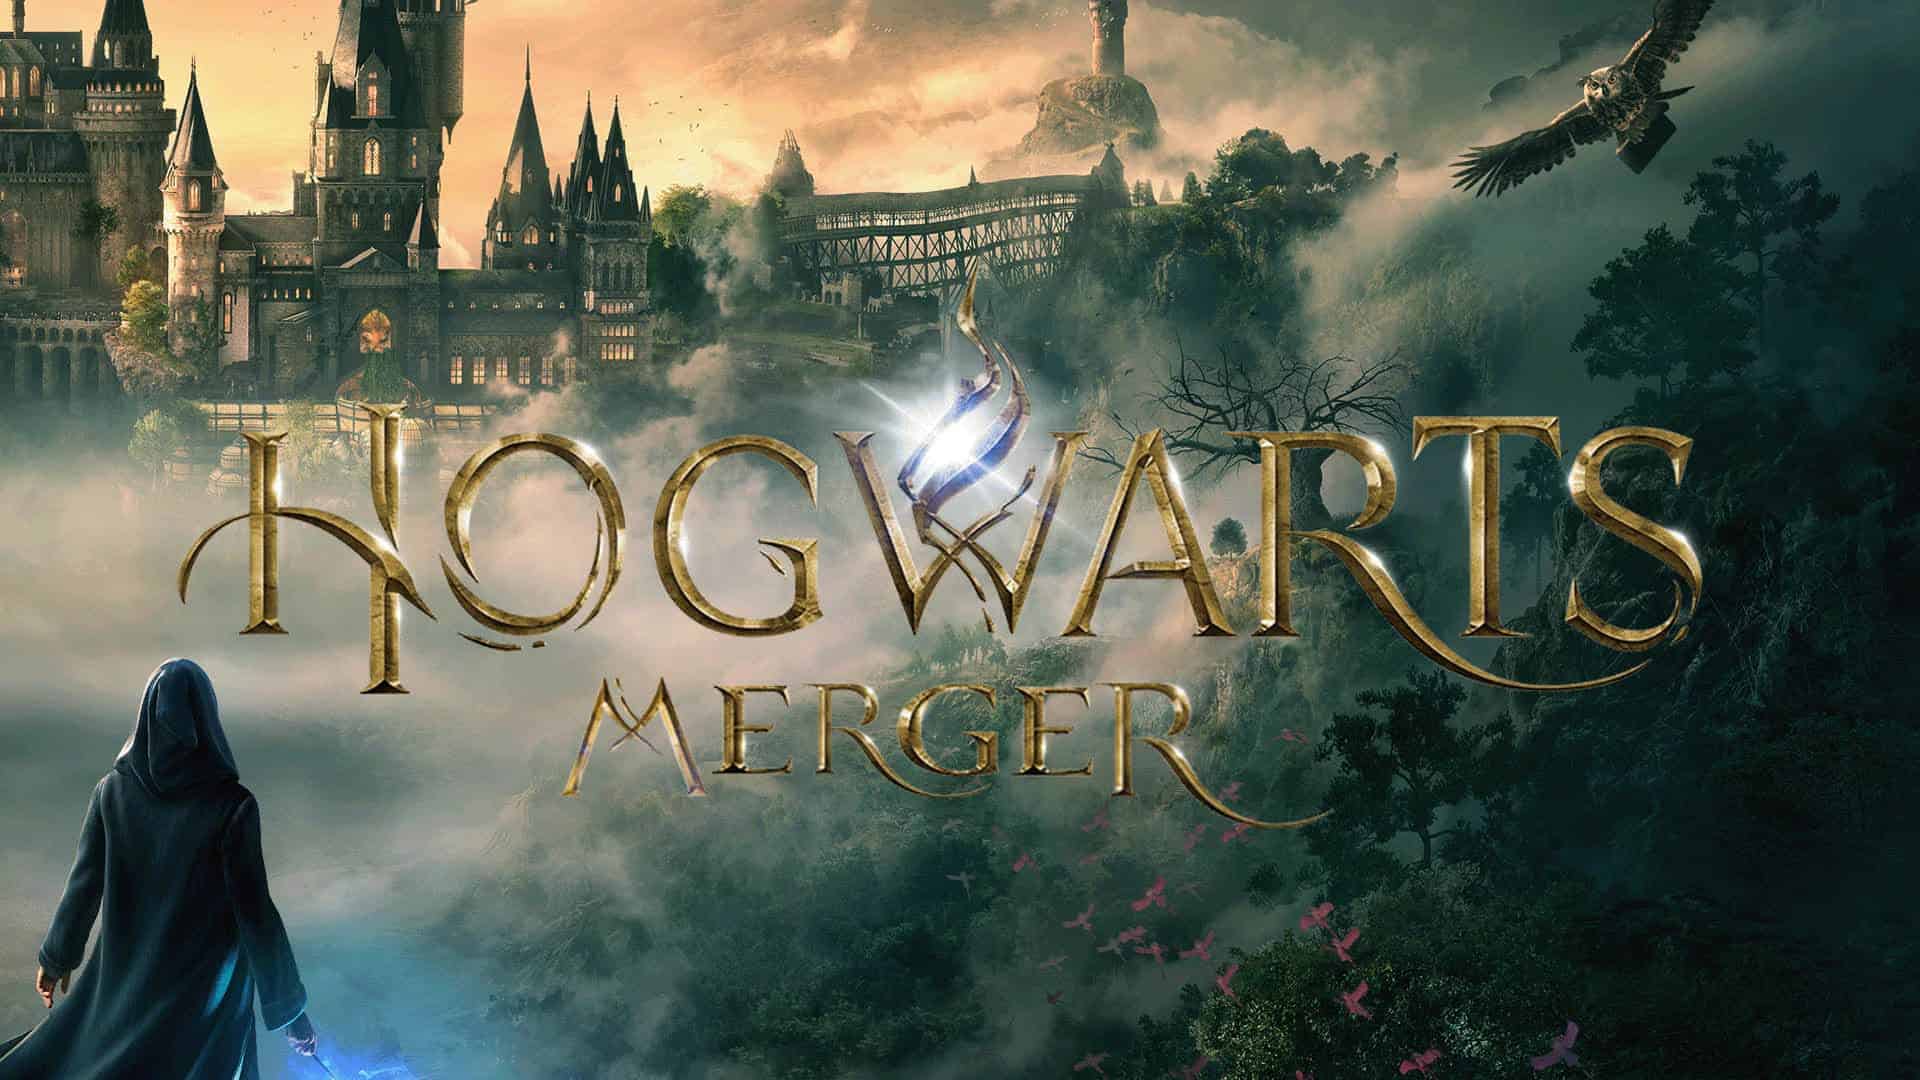 You can finally play as Harry Potter in Hogwarts Legacy thanks to mods